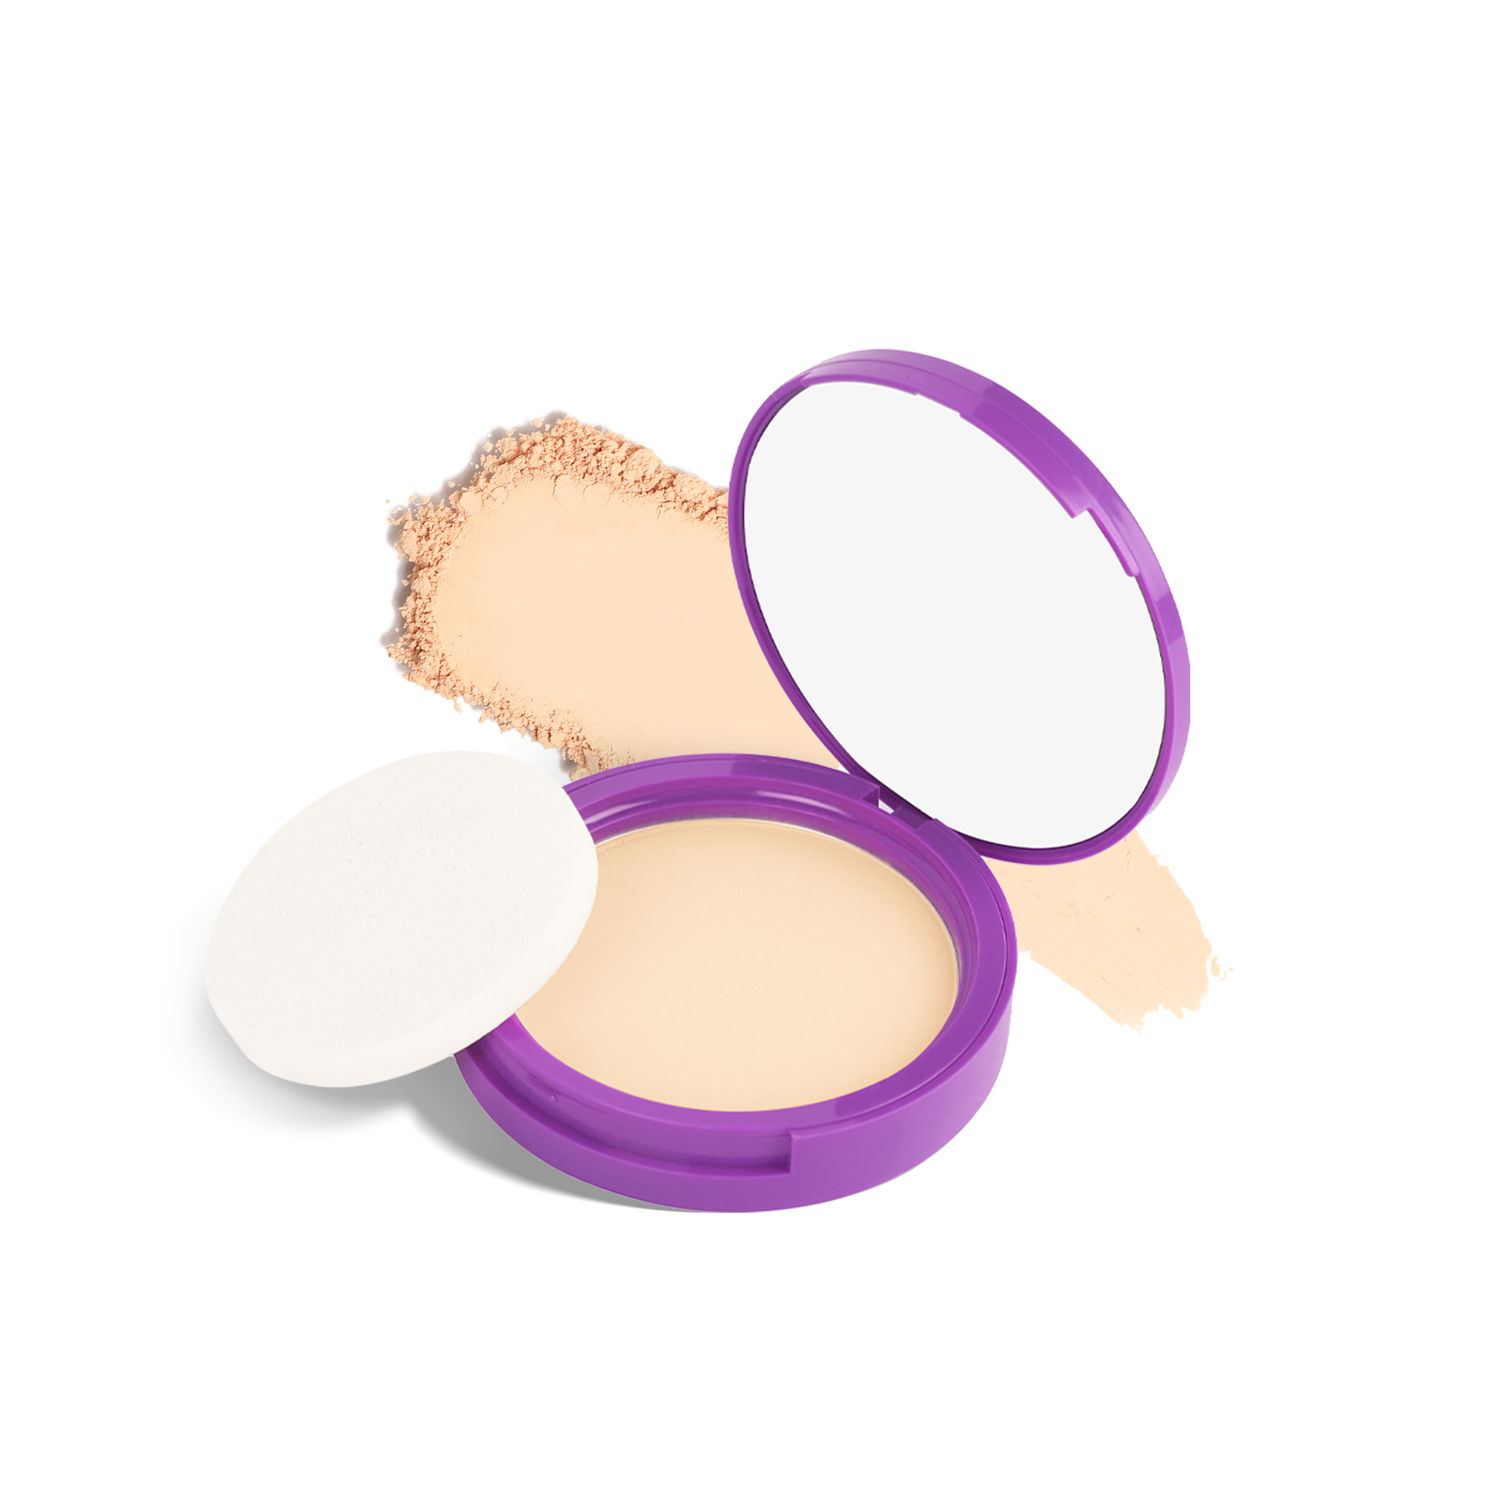 Buy SUGAR POP Longwear Compact - 02 Beige - SUGAR POP Longwear Compact Infused with & Castor Oil, UV Protection, Pore Minimising, Shine-Free, Long Lasting Finish, Ultra Lightweight on Skin l Face Compact for Women l 9 gm - Purplle